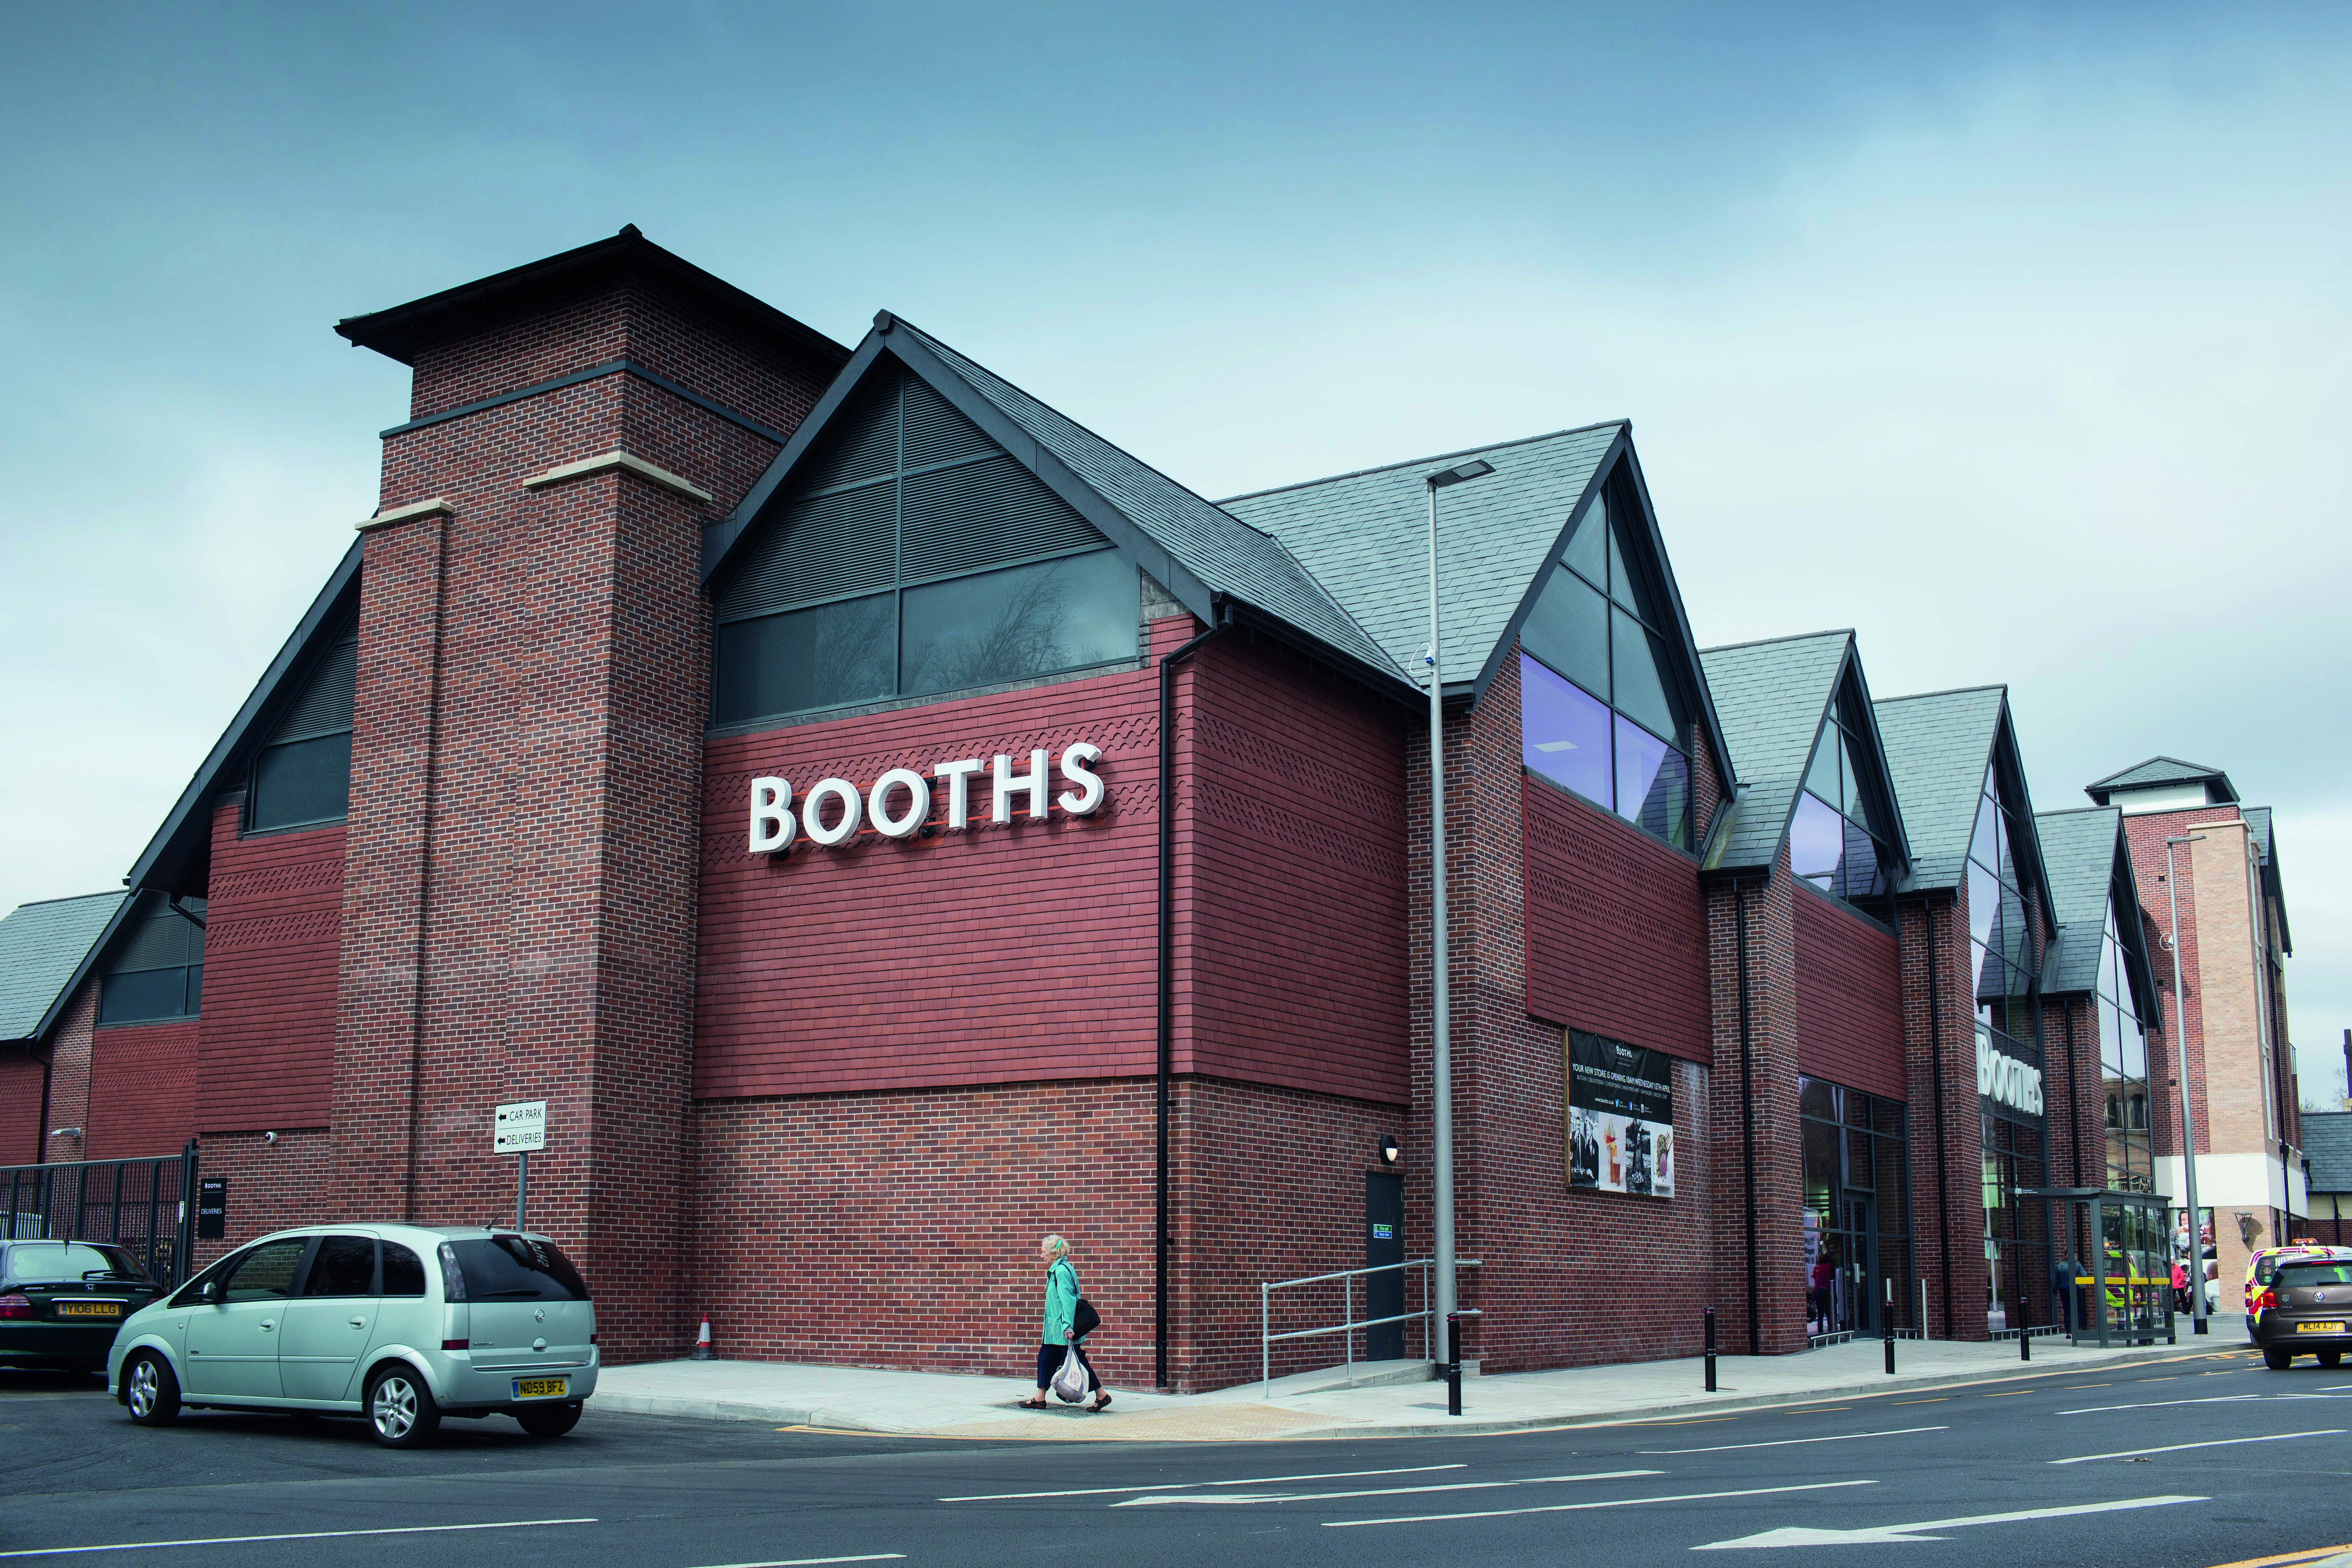 Booths Hale Barns Opening Hours & Directions